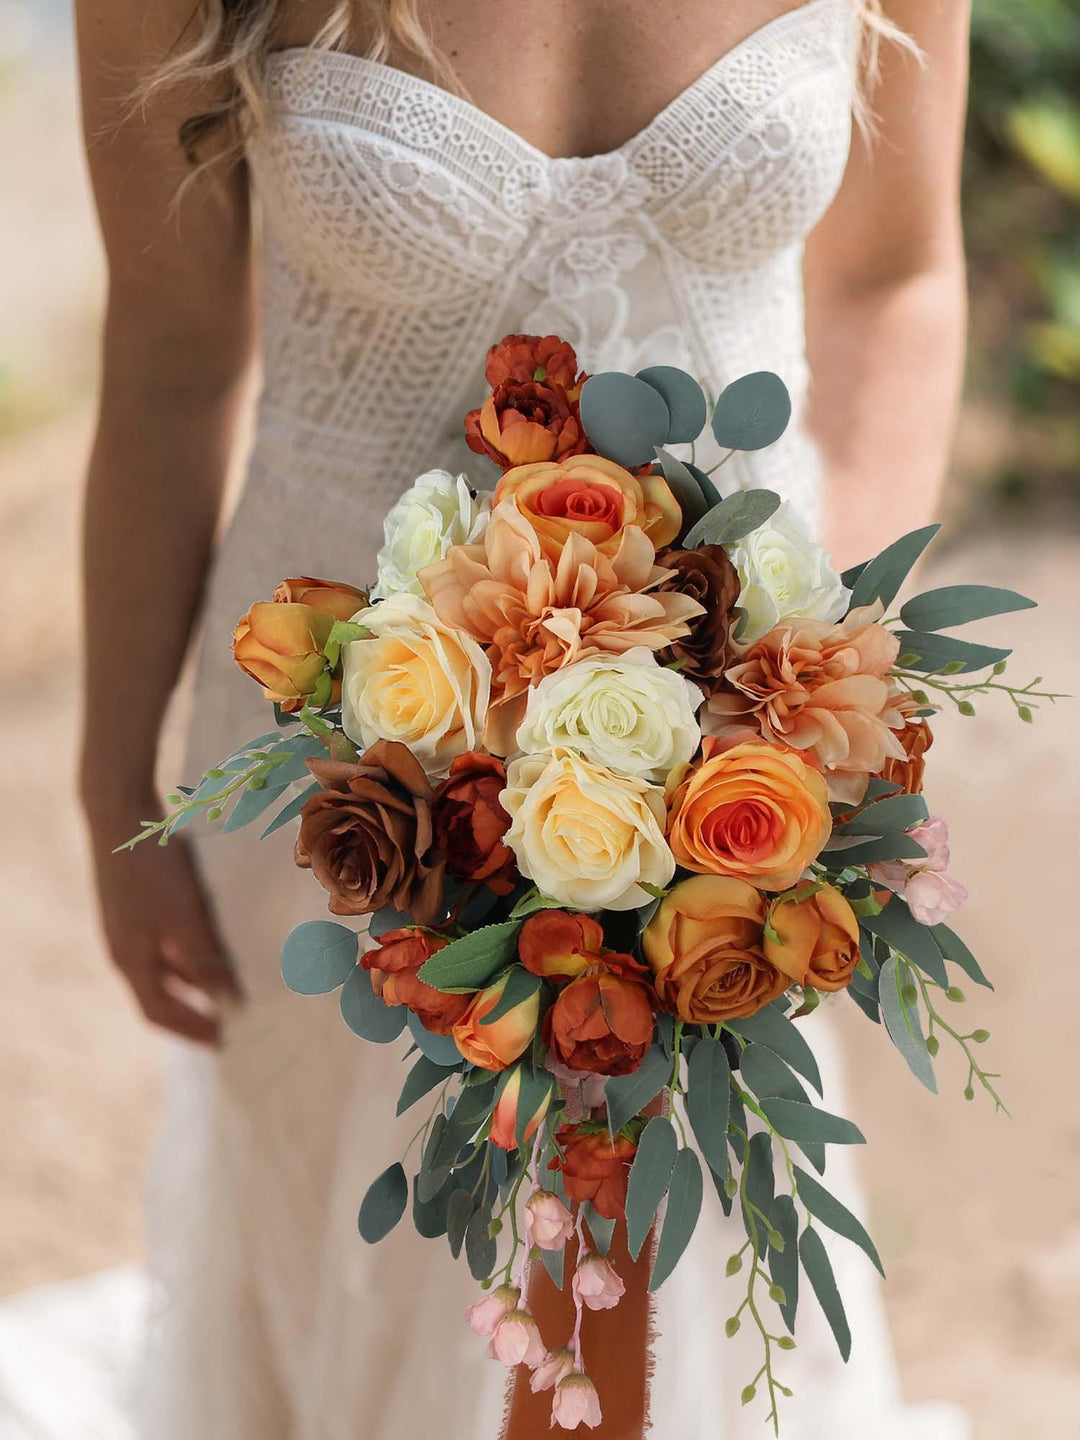 How to Choose the Perfect Wedding Dress to Complement Your Beloved Burnt Orange Cascade Bouquet?